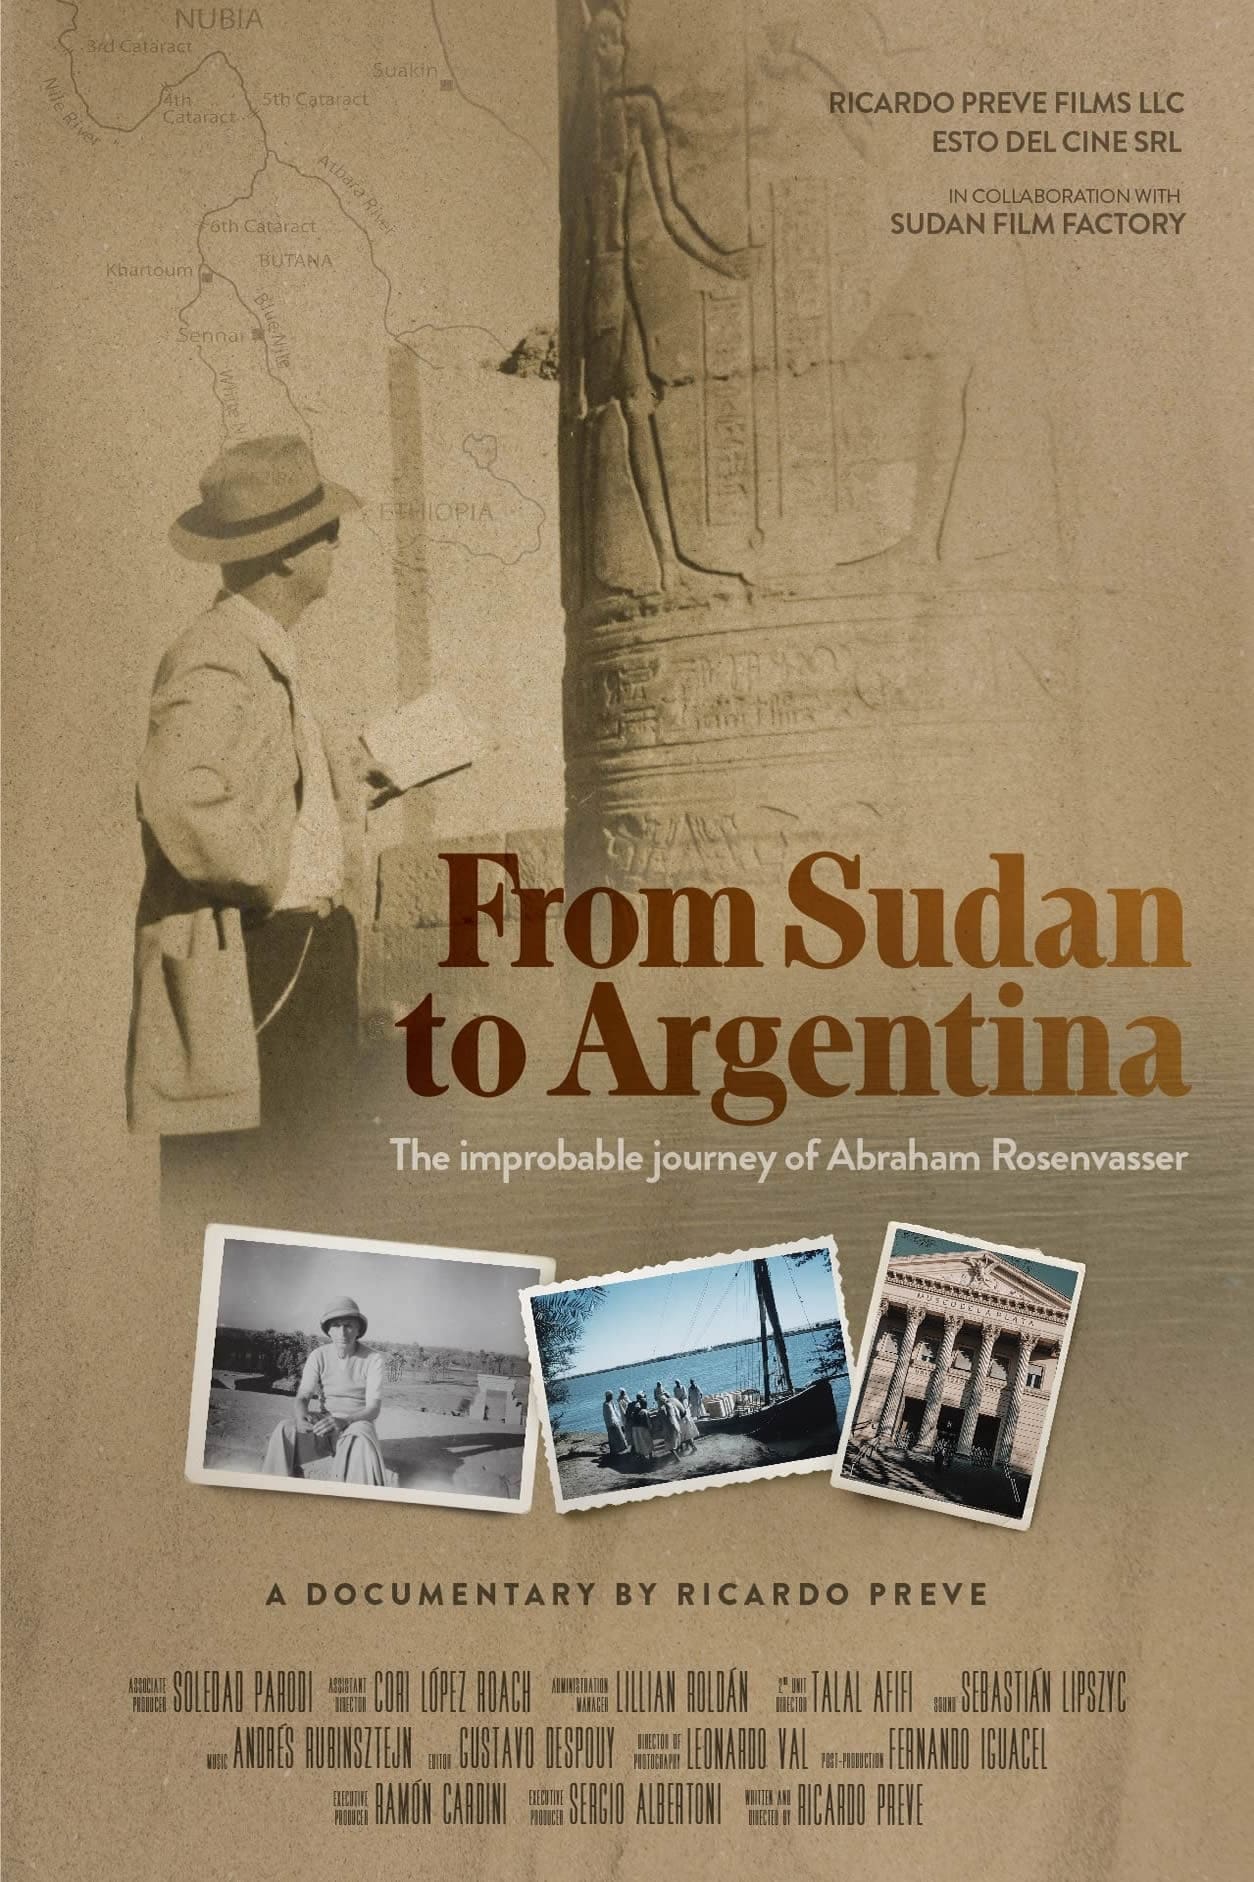 From Sudan to Argentina